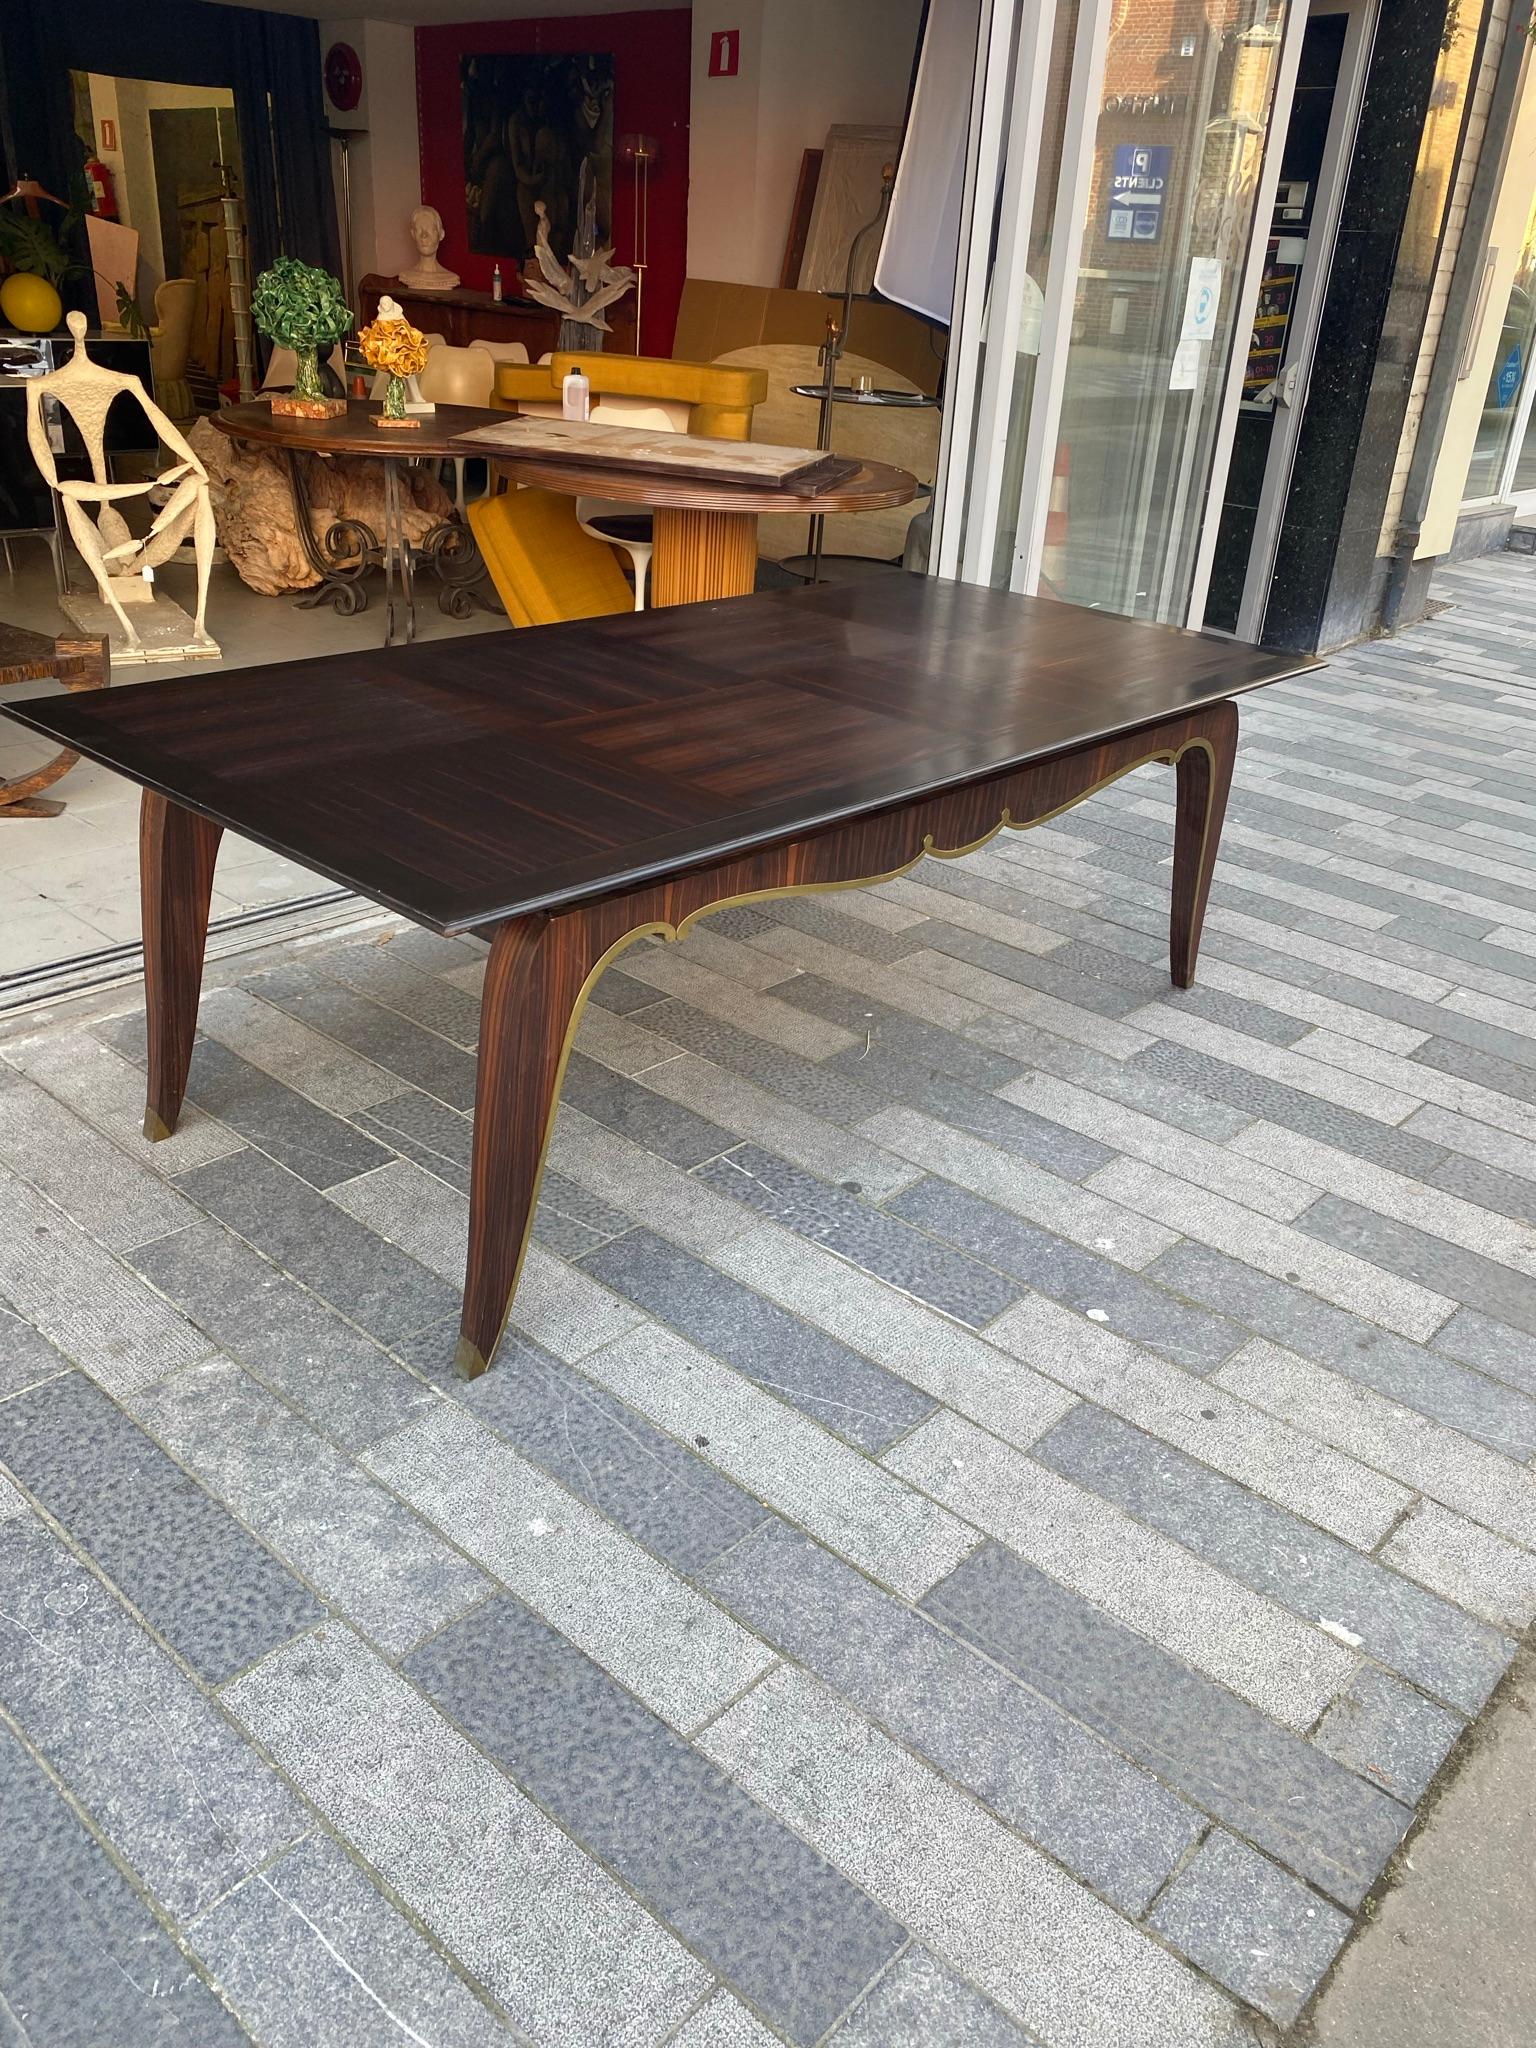 Rare large Art Deco table in Macassar ebony and bronze circa 1930 
very nice veneer with small flaws, the table varnish must be redone 
Dimension: 74 x 220 x 110 cm
74 x 320 x 110 cm with extension.